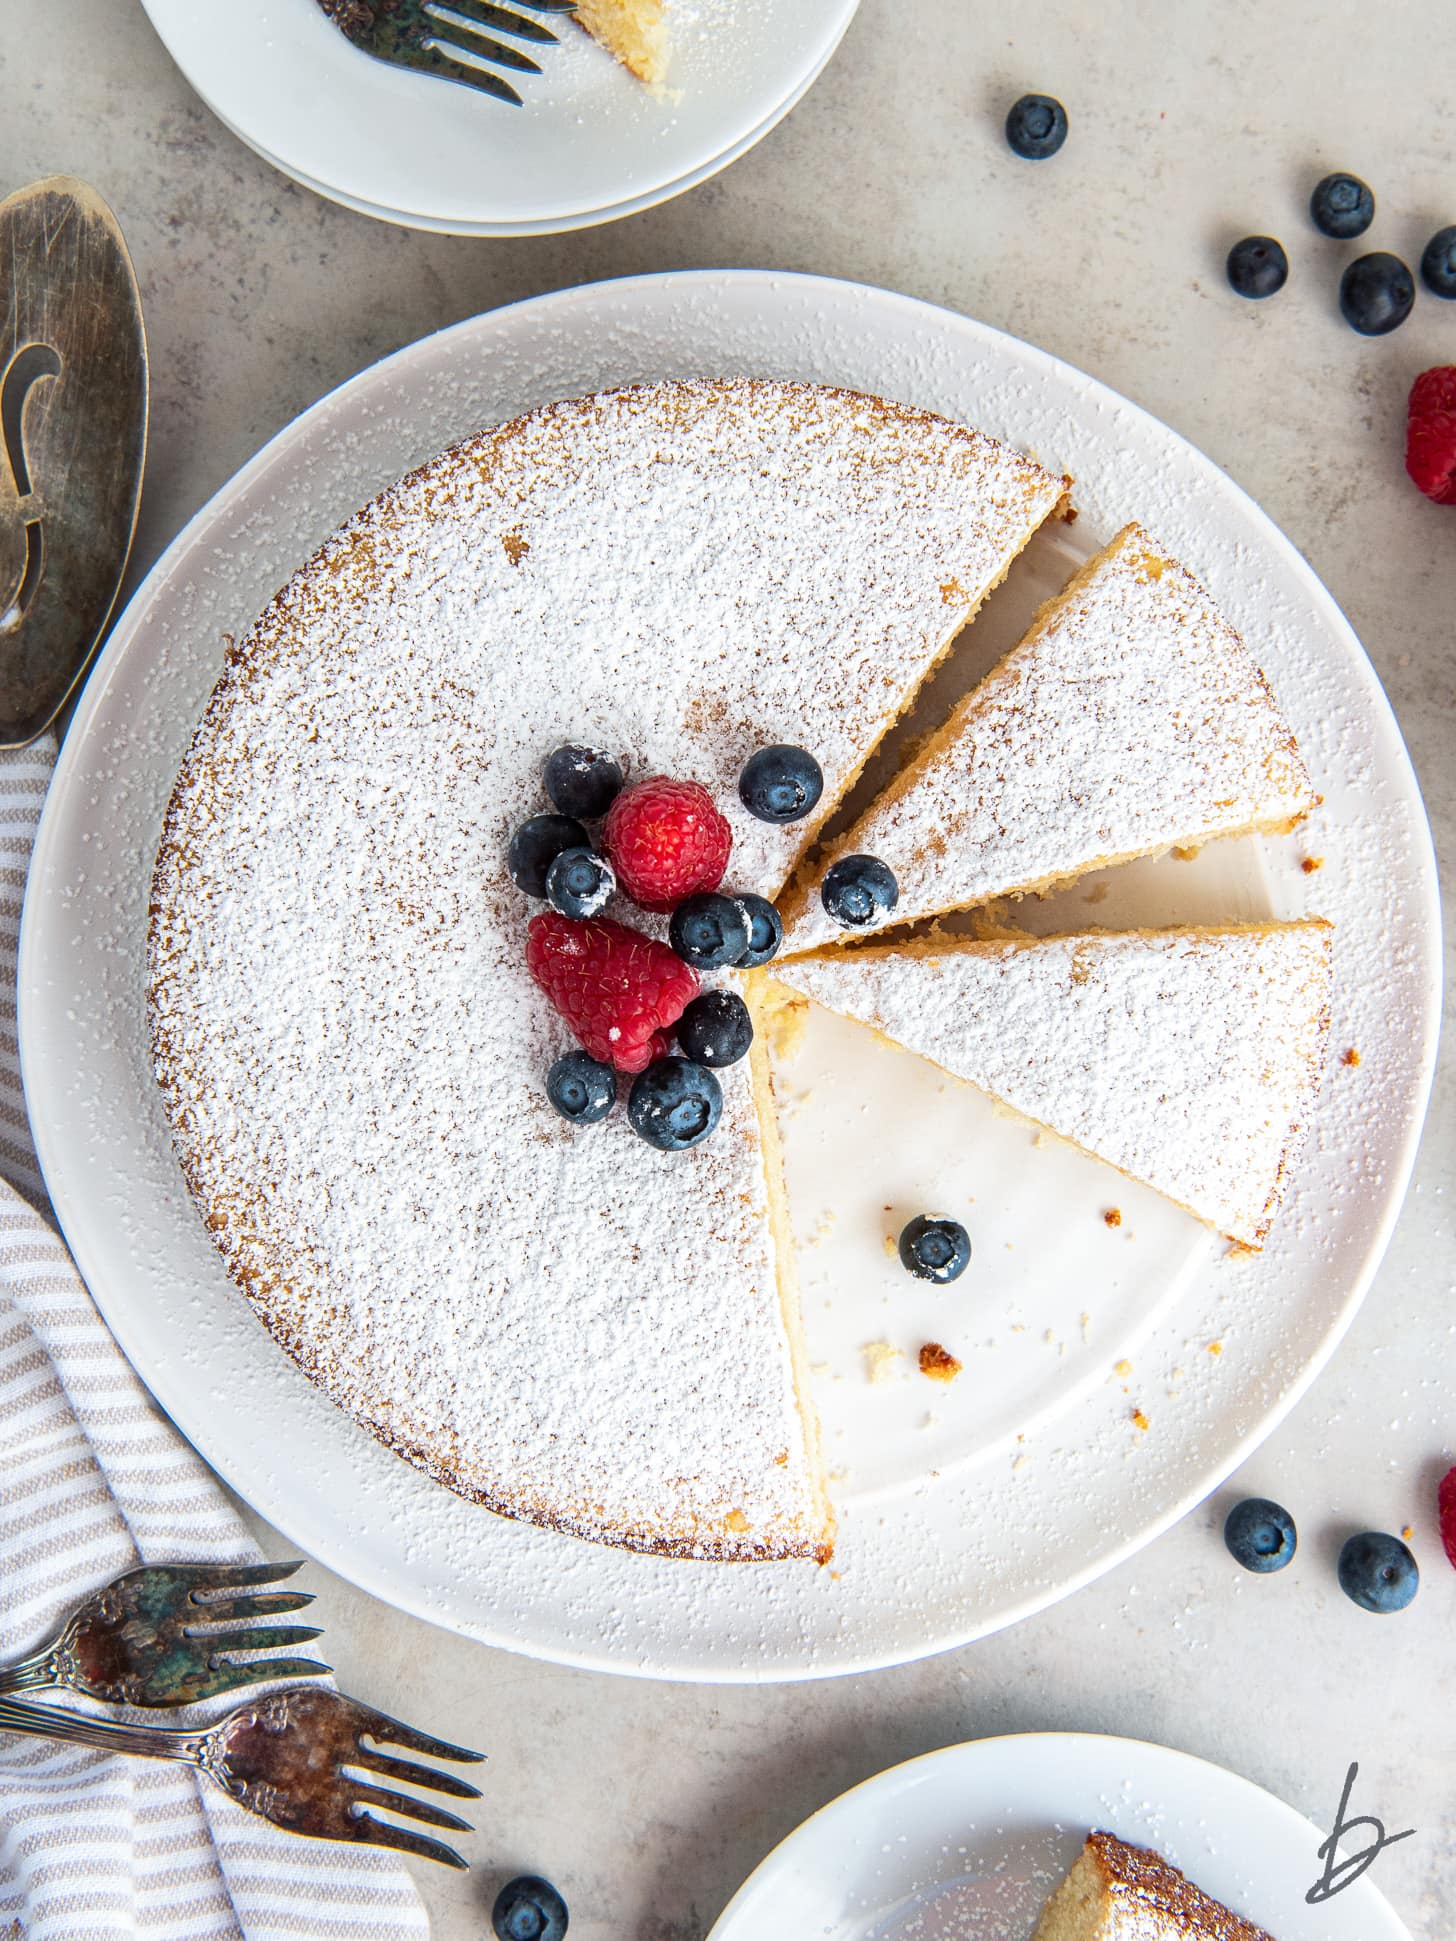 irish tea cake dusted with confectioners' sugar, topped with berries and one slice cut.